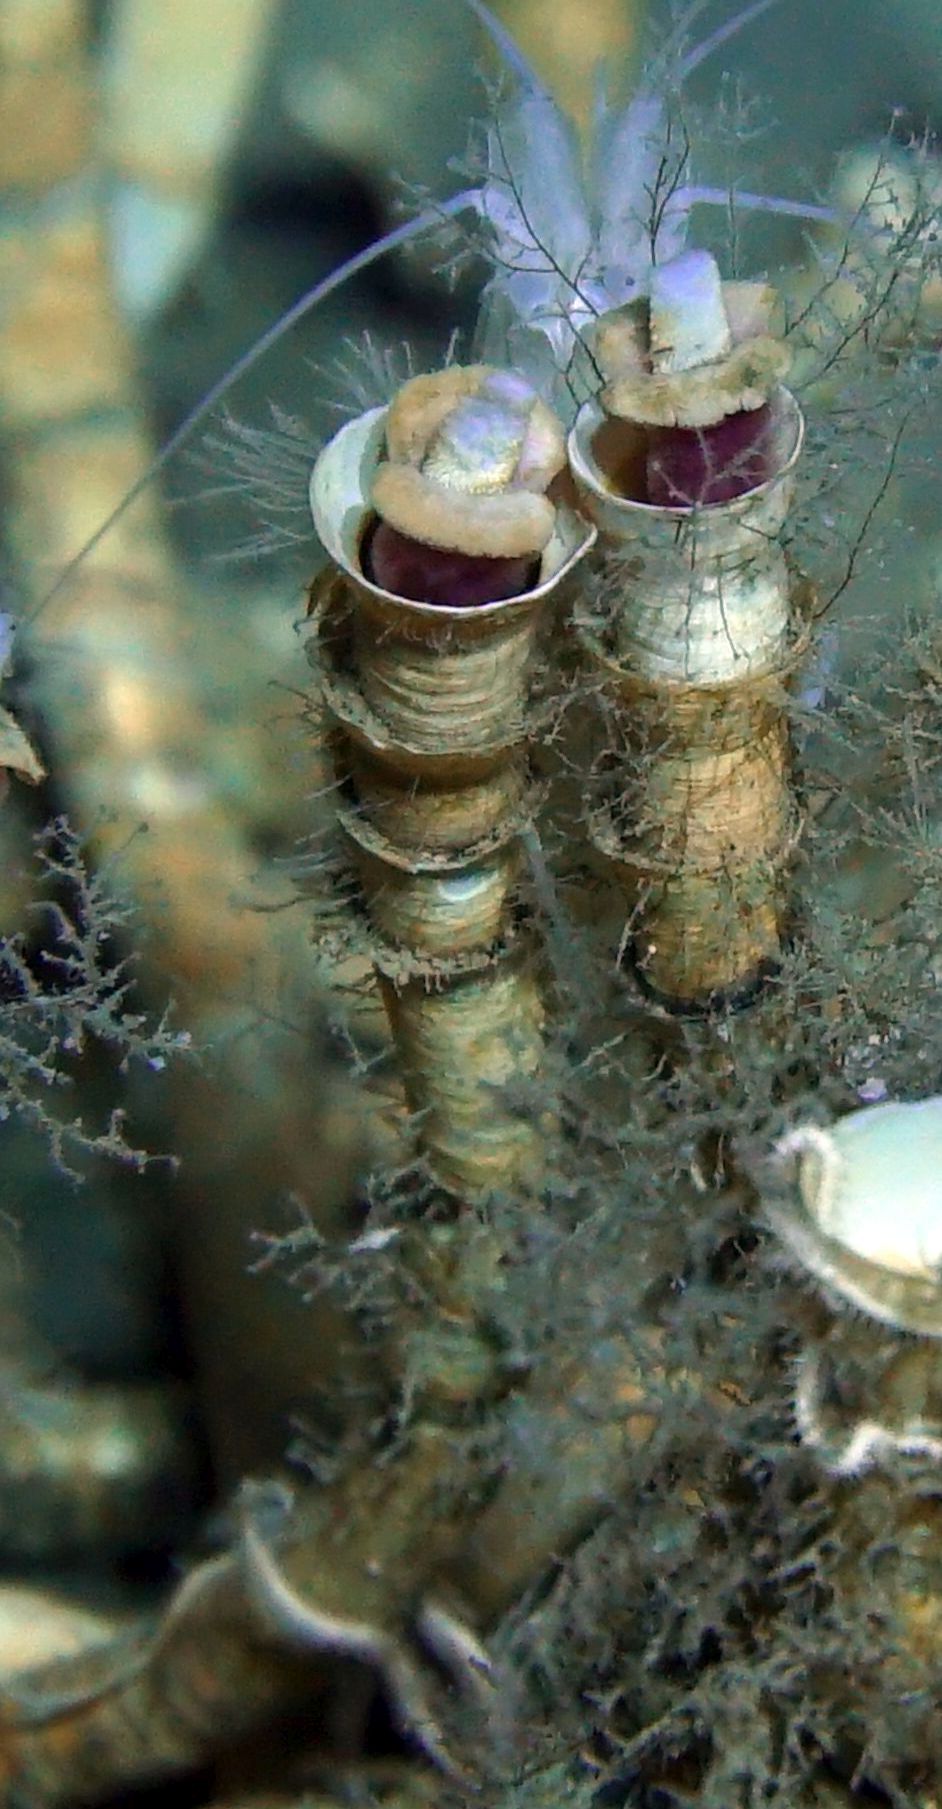 Tubeworms’s tube – a unique supporting structure for them to acquire inorganic matter from the seabed, from which allows their co-living bacteria to produce organic nutrients.